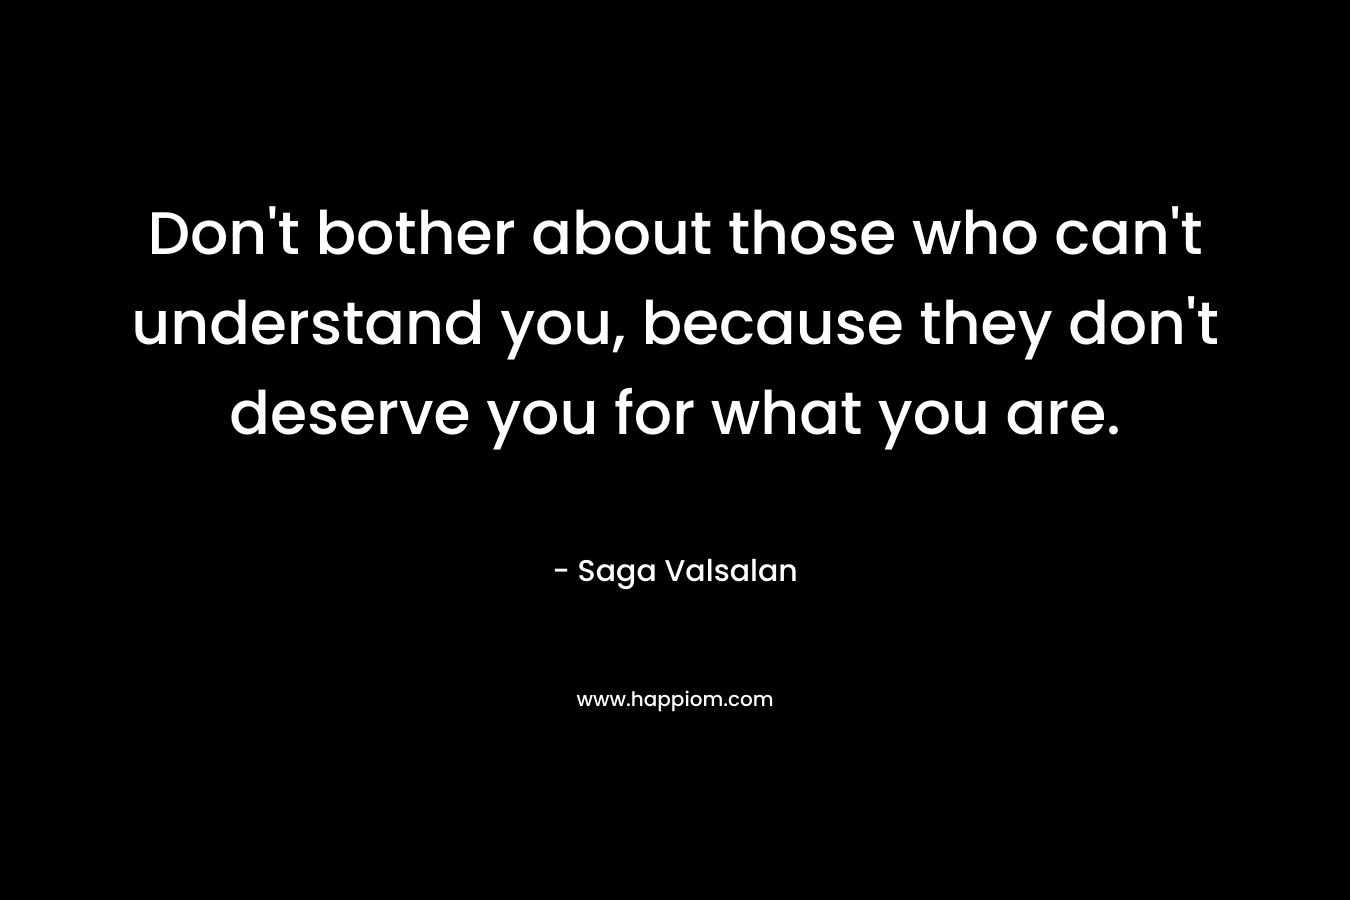 Don't bother about those who can't understand you, because they don't deserve you for what you are.